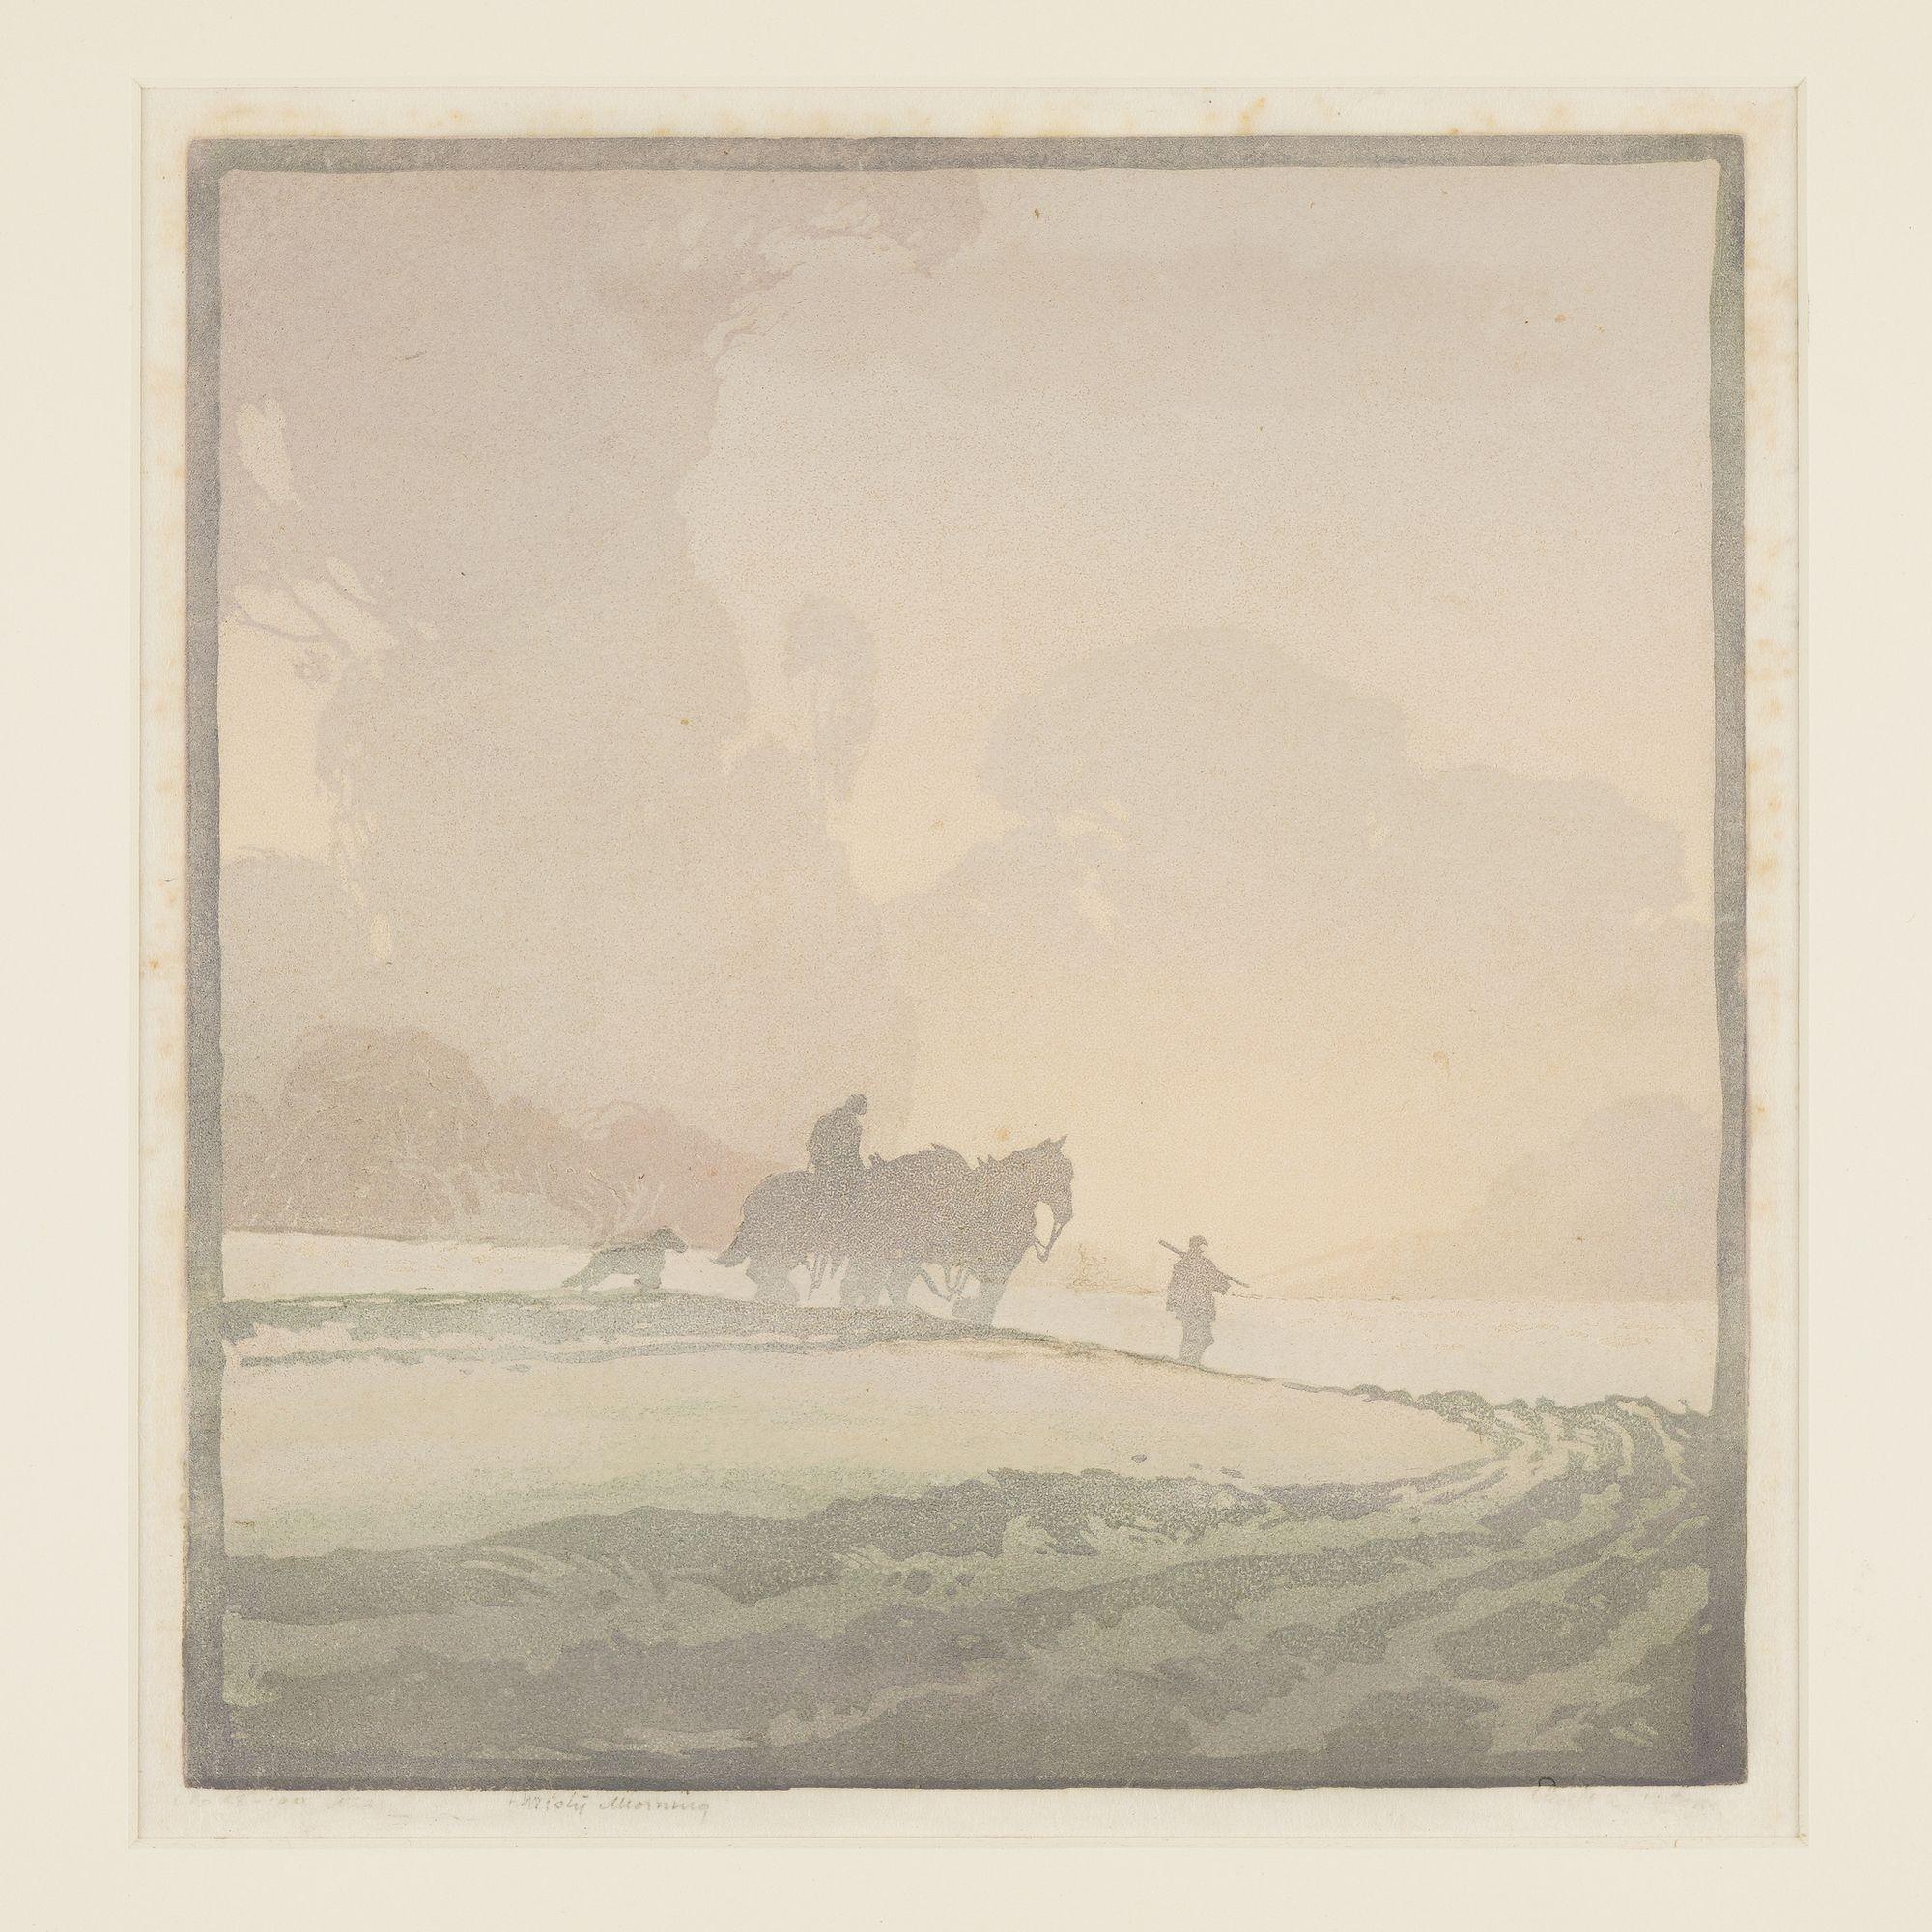 Linocut print on paper of a warm, pastoral evening landscape rendered in soft shades of green, brown, and purple. Archival mounted under UV glass and framed.

Numbered and dated in graphite, LL: No. (illegible) - 100 (date obscured) Misty